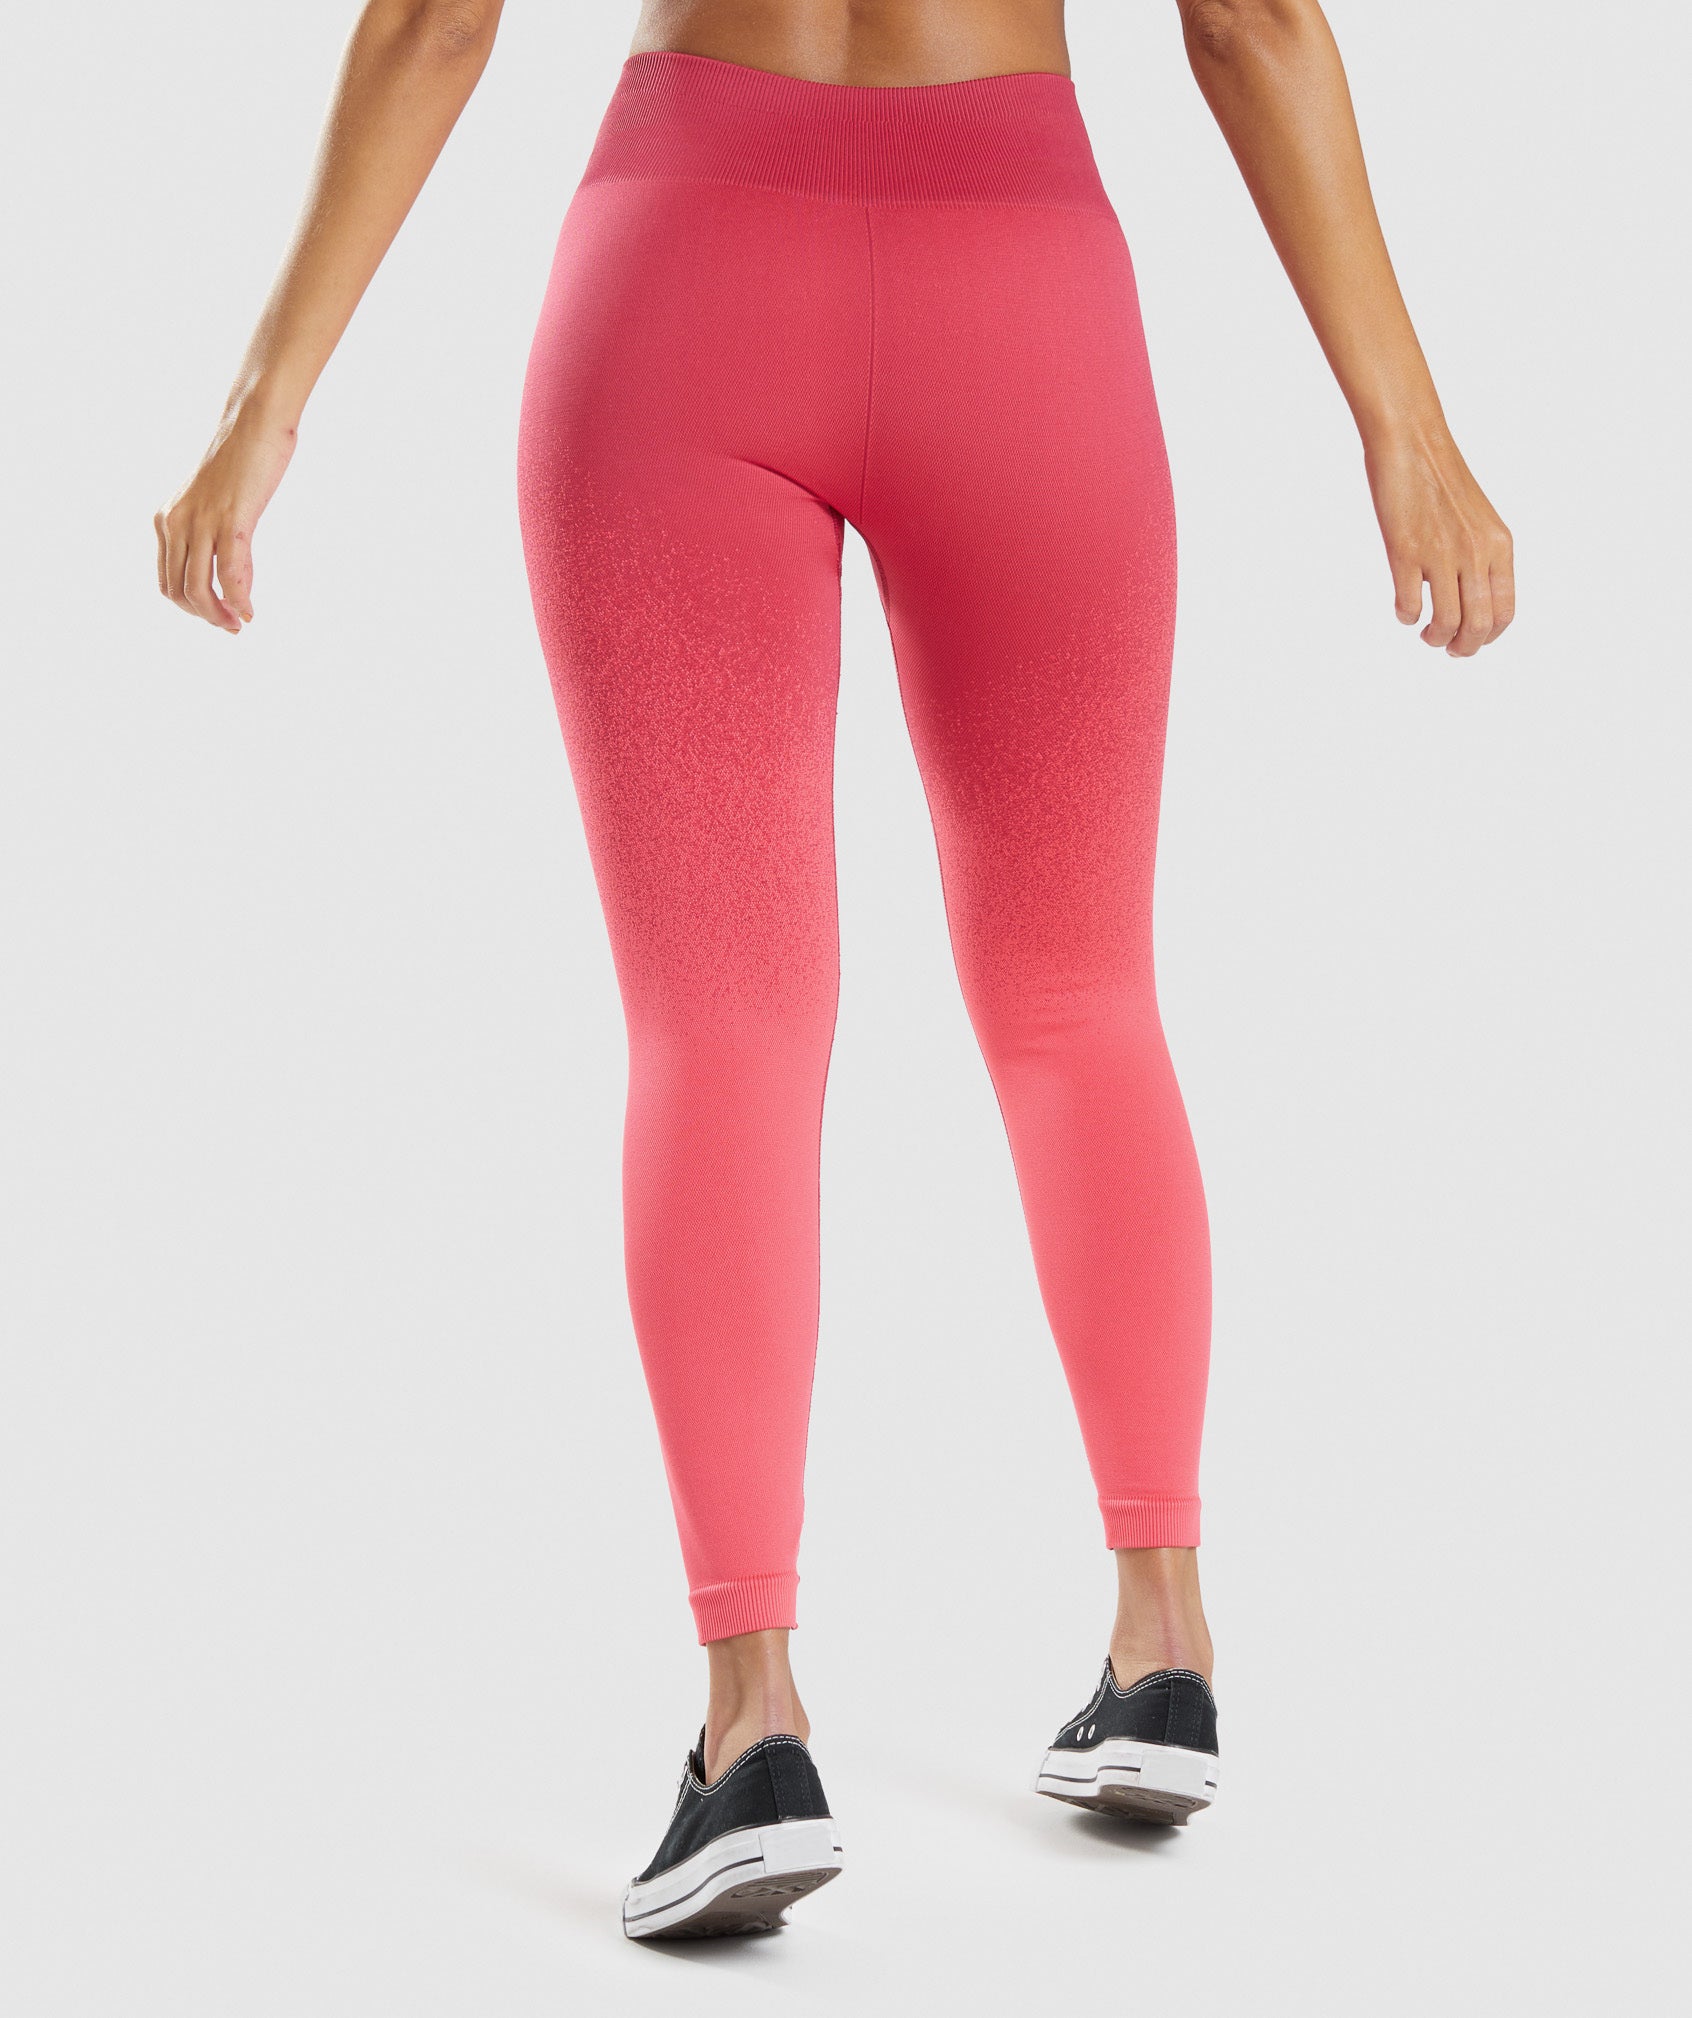 Gymshark ombré ombre leggings chalk pink beet small NWT for Sale